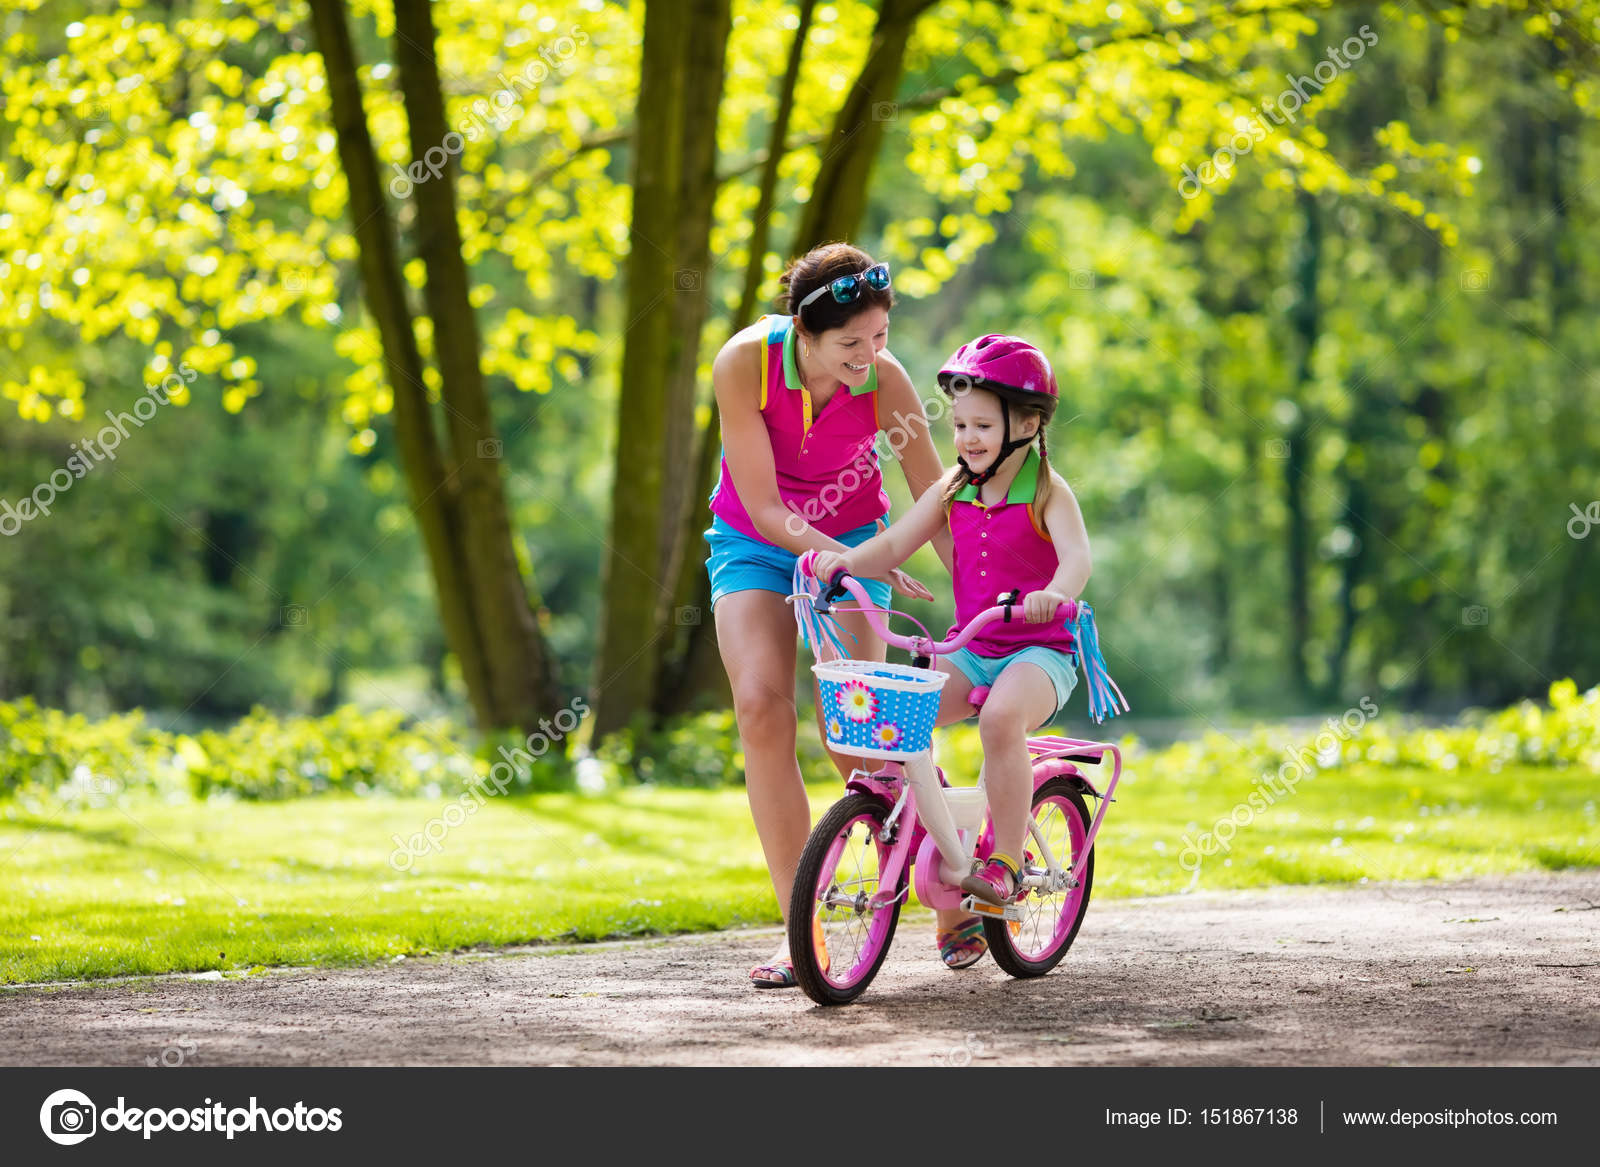 teaching child to cycle